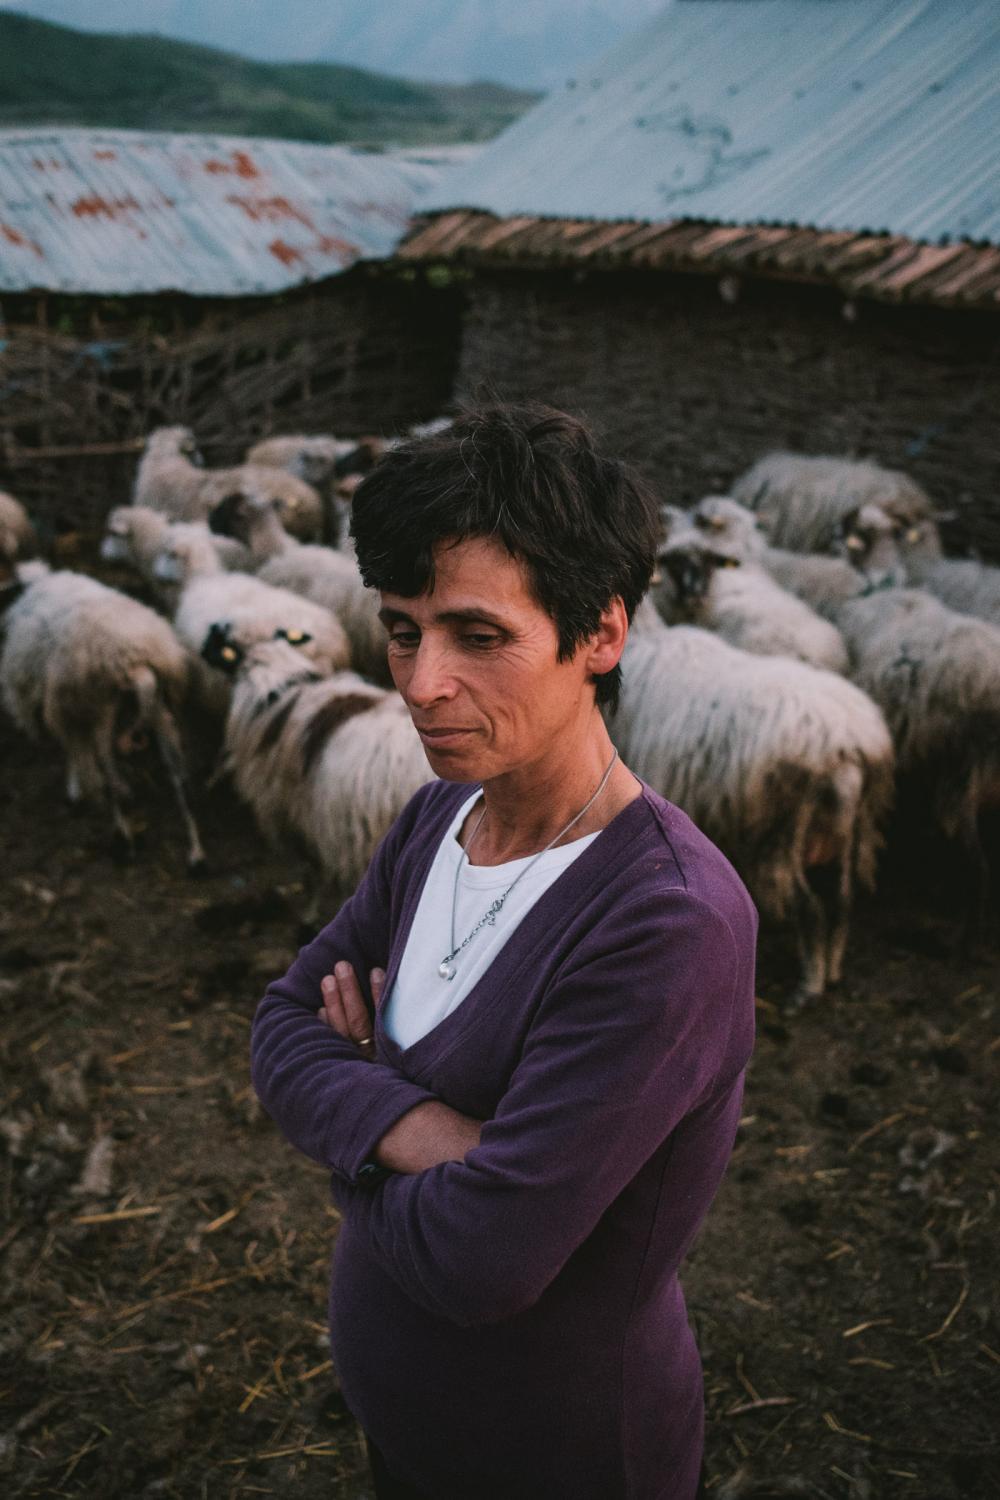 Ylli and her family raise sheep and grow crops on their land below the village of Kuta. The...